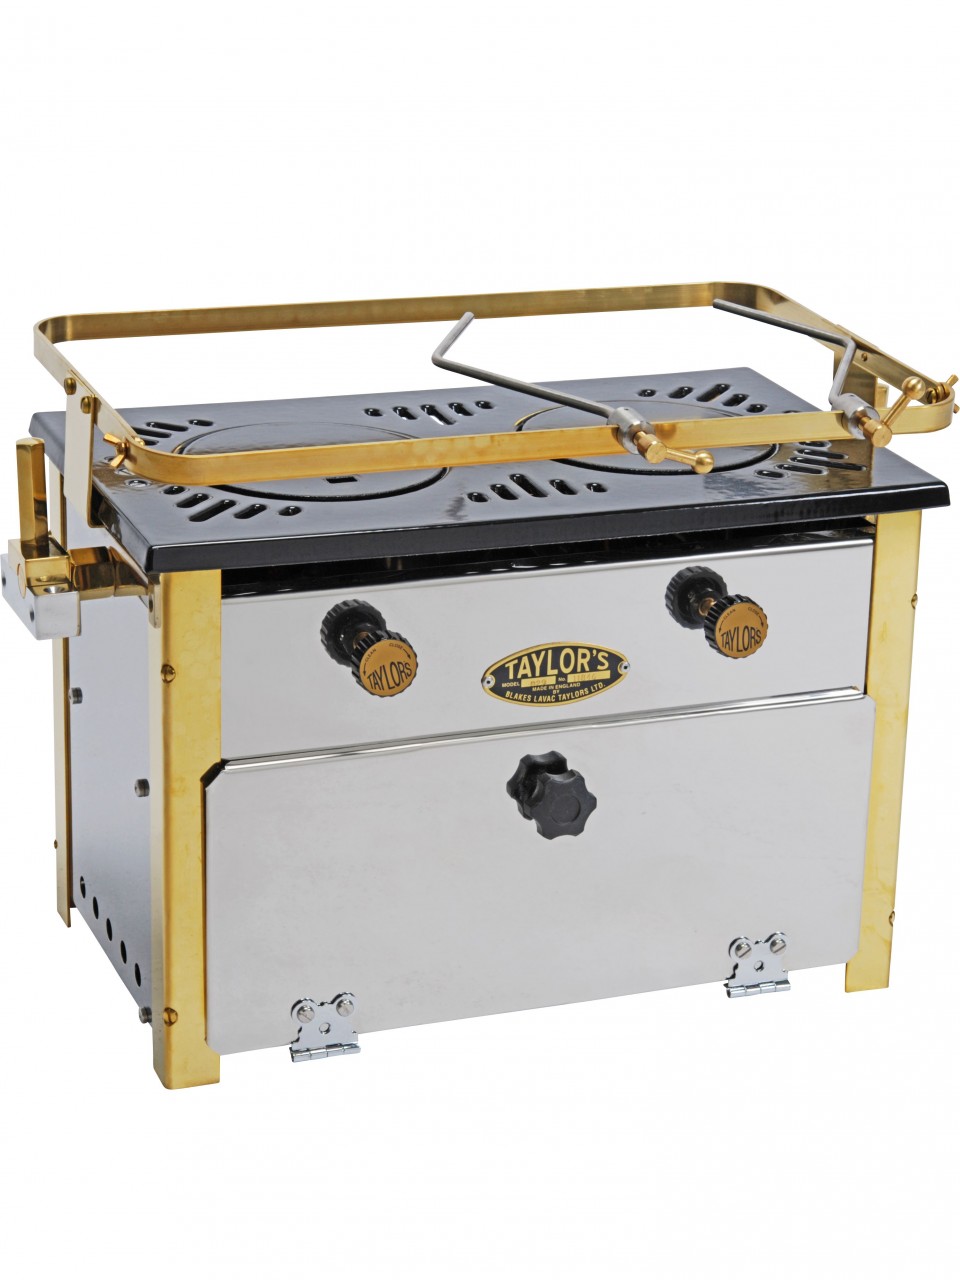 Paraffin cooker with grill TAYLOR'S 029